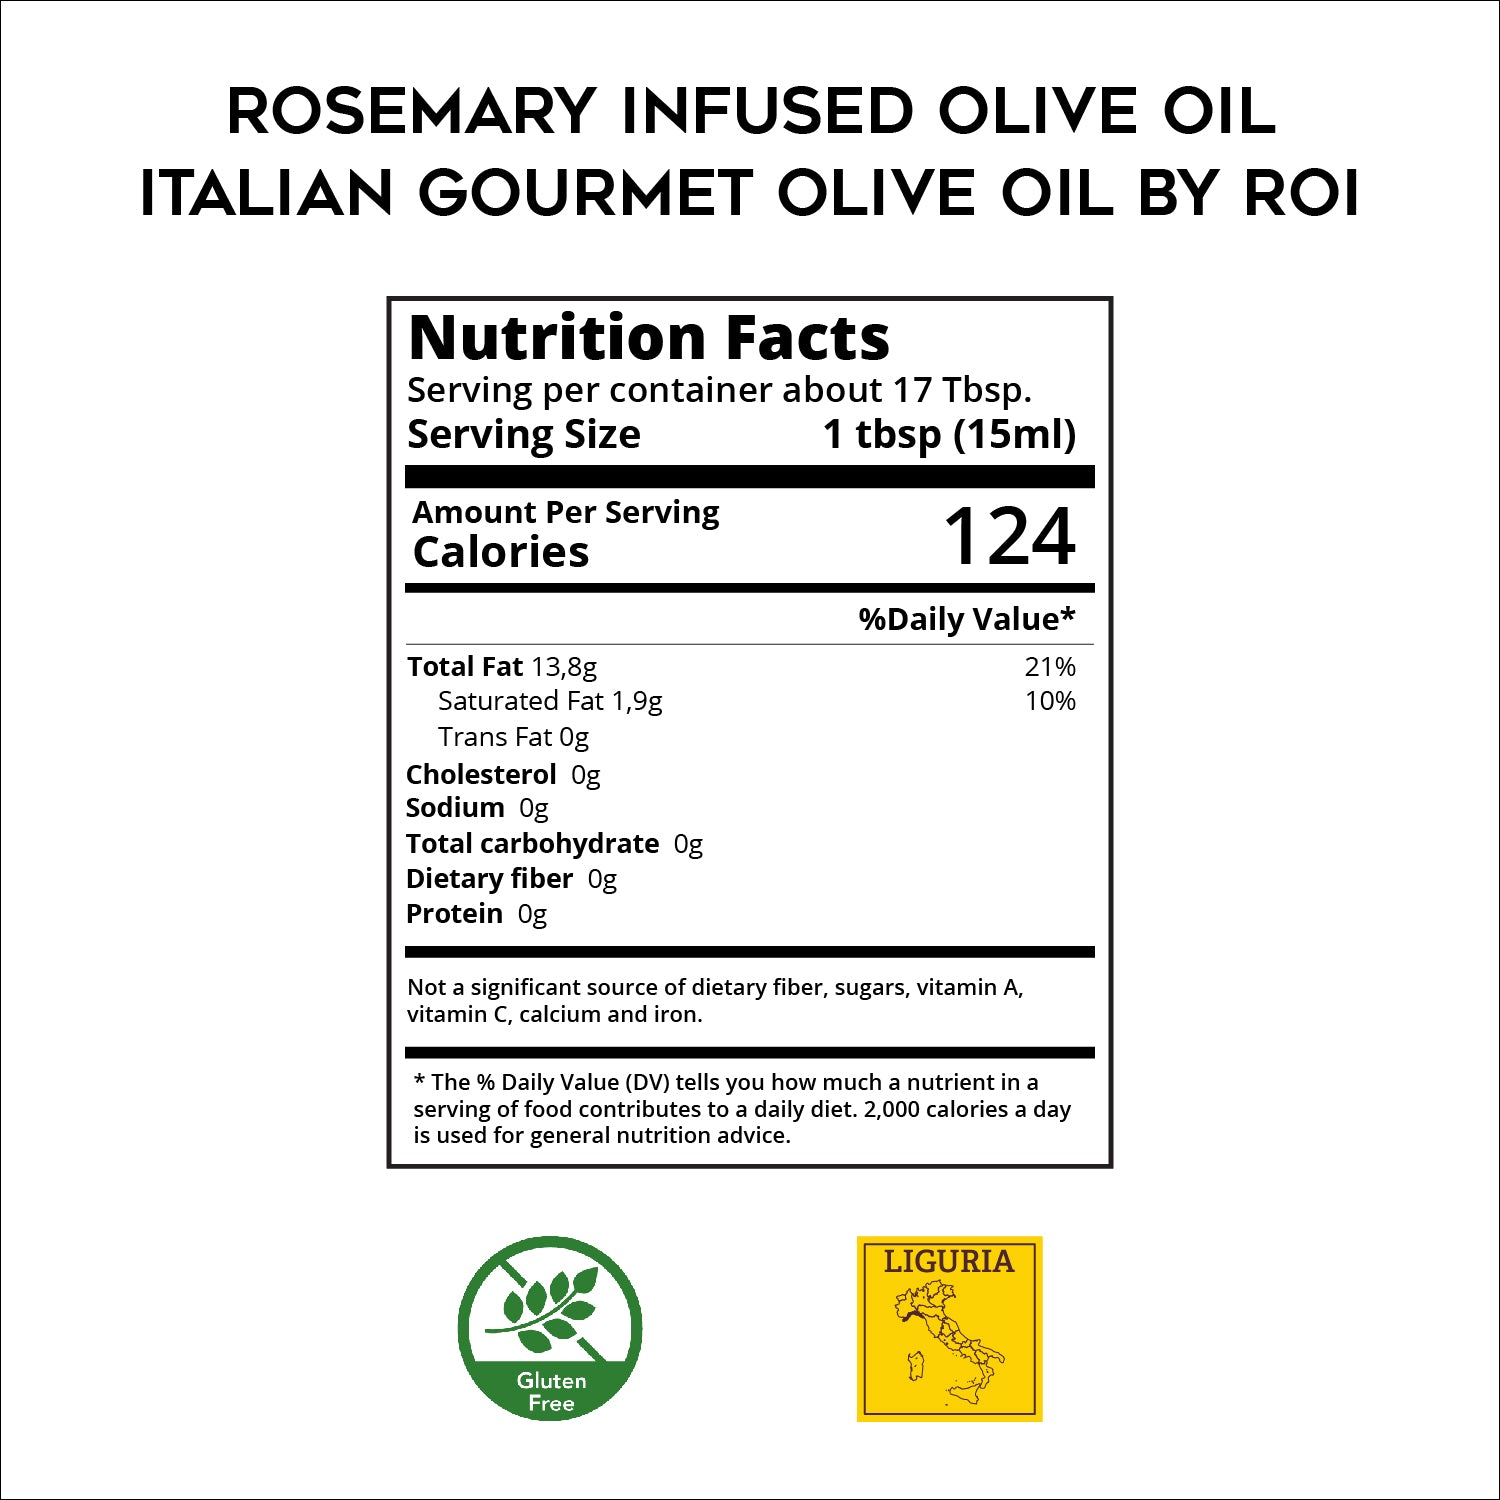 Rosemary Infused Olive Oil - Italian Gourmet Olive Oil by ROI